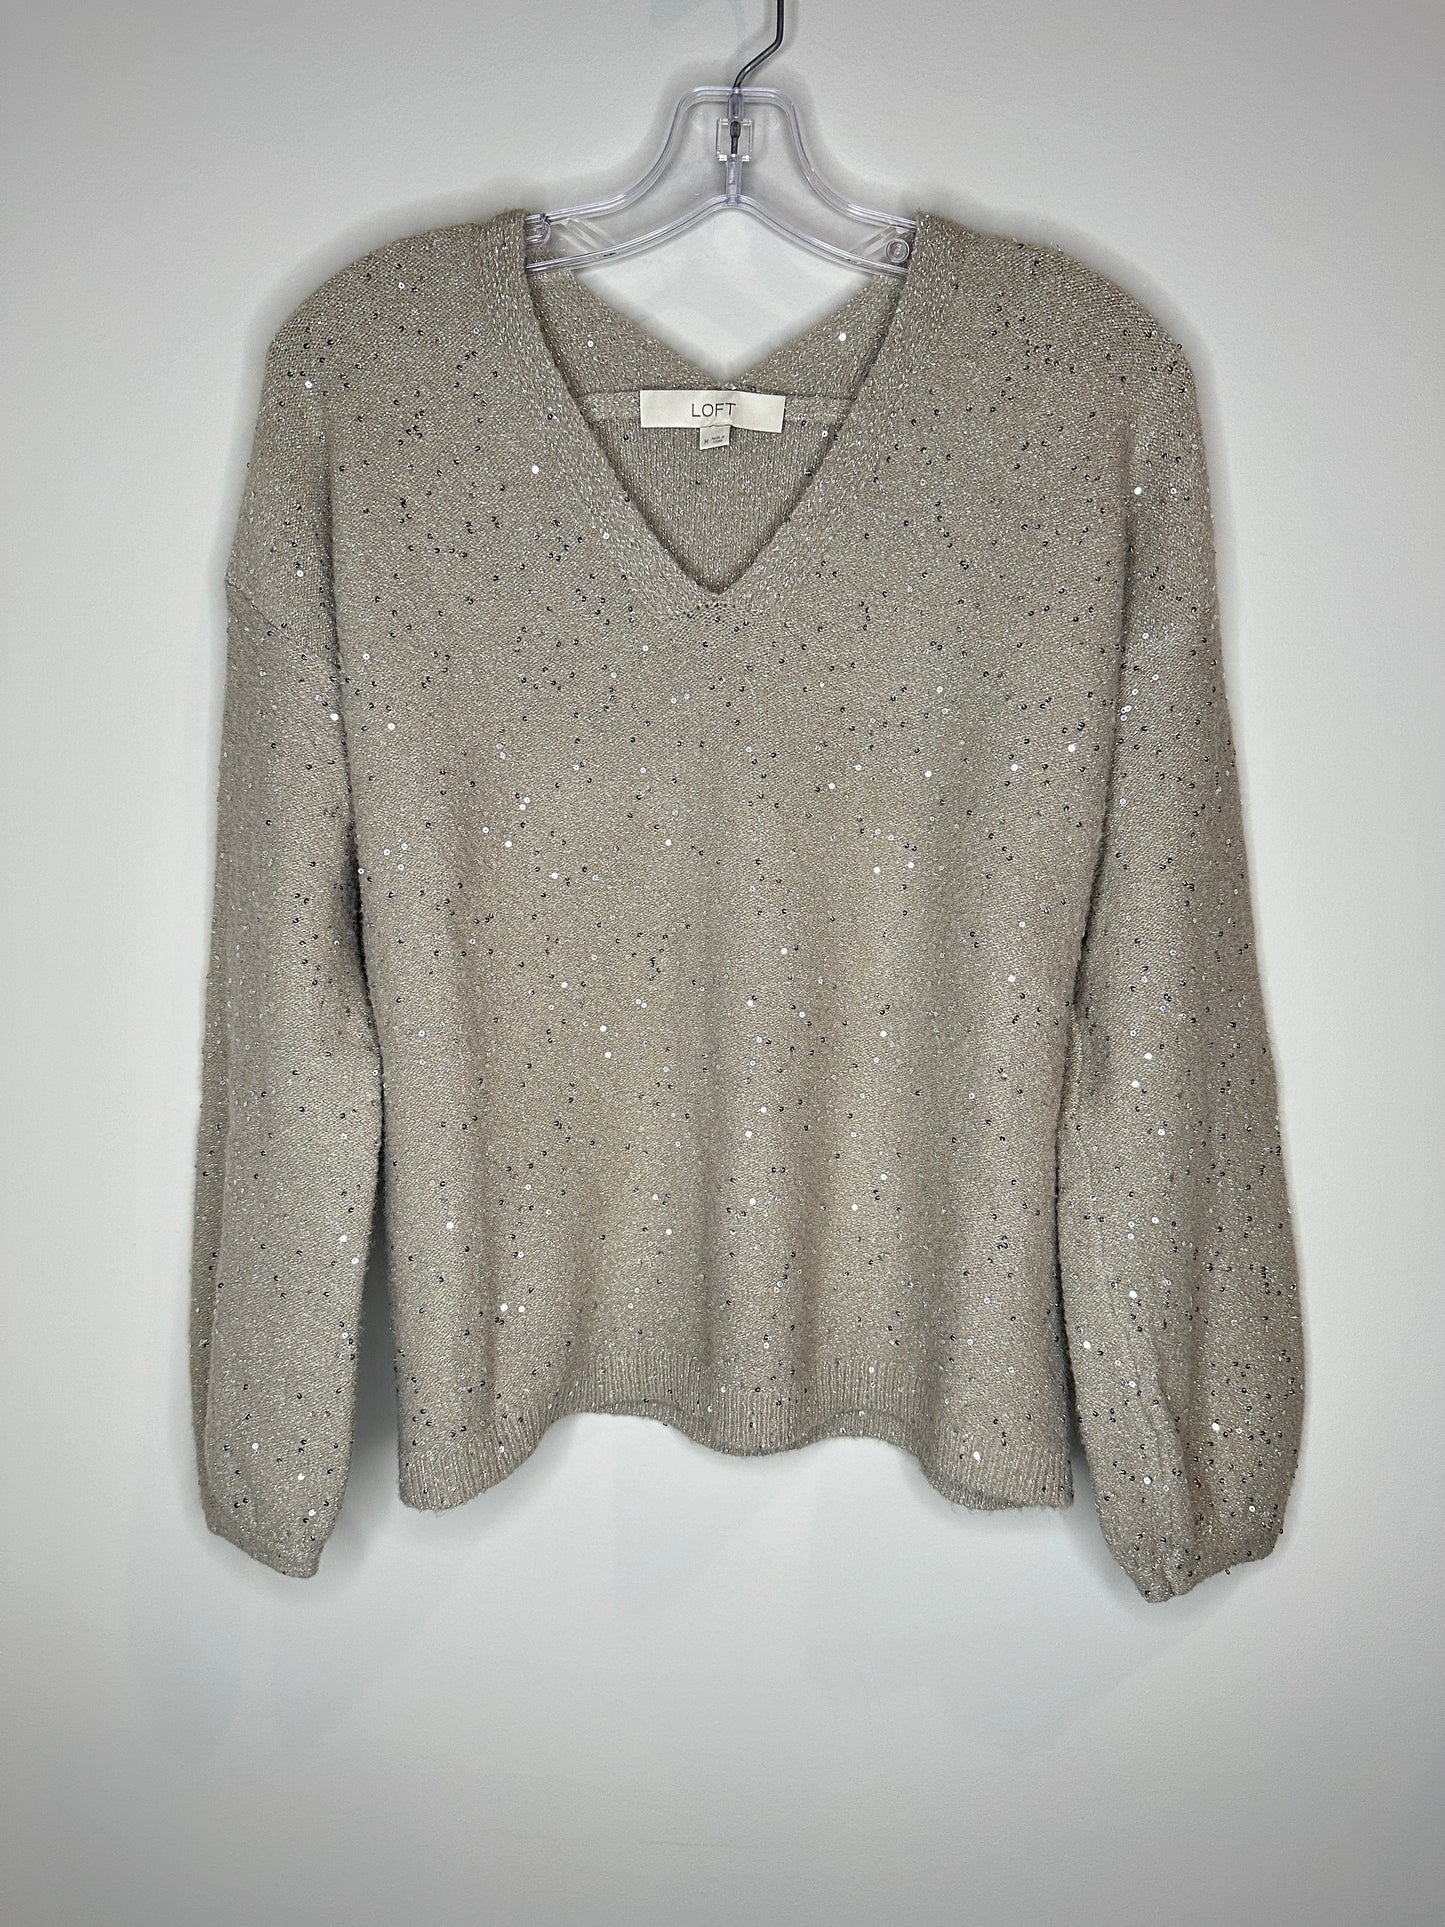 LOFT Size M Taupe V-Neck Sequined Sweater